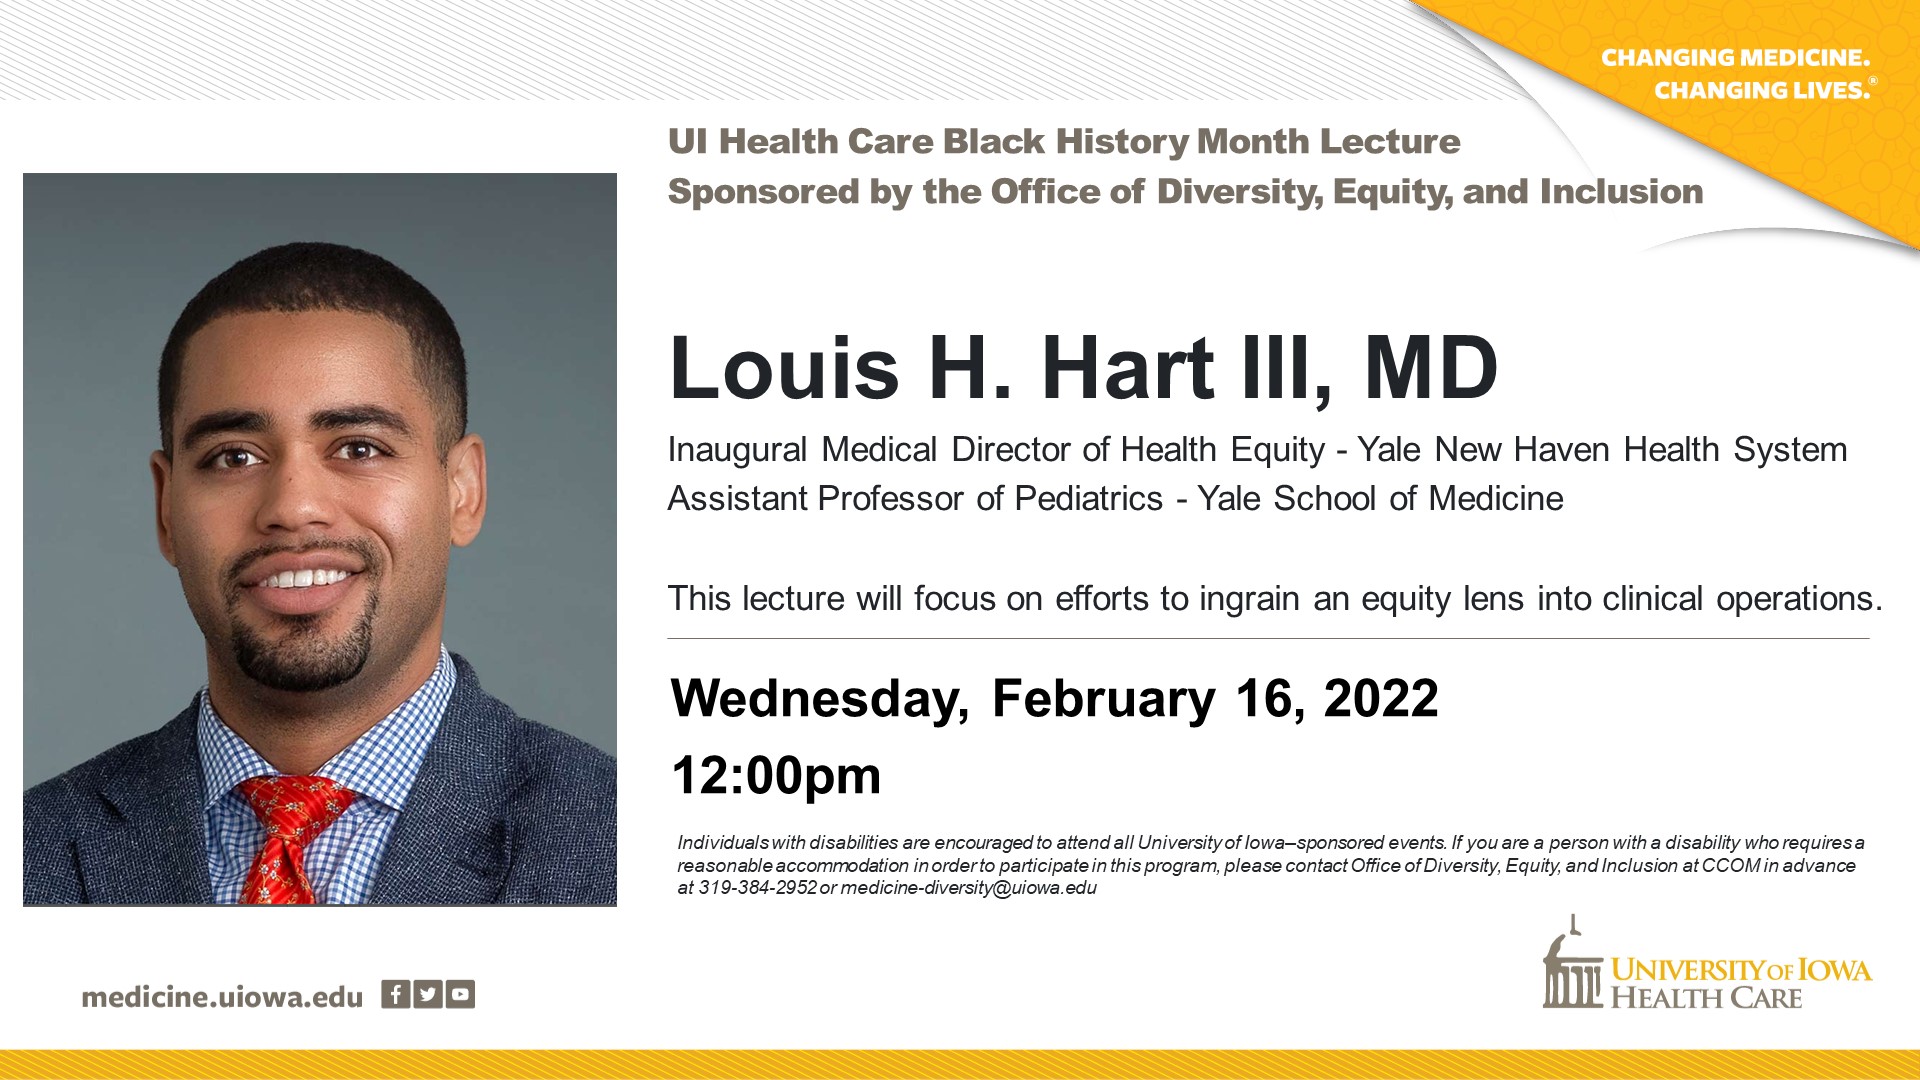 UI Health Care Black History Month Lecture - “Pursuing Health Equity – A Call to Action” promotional image